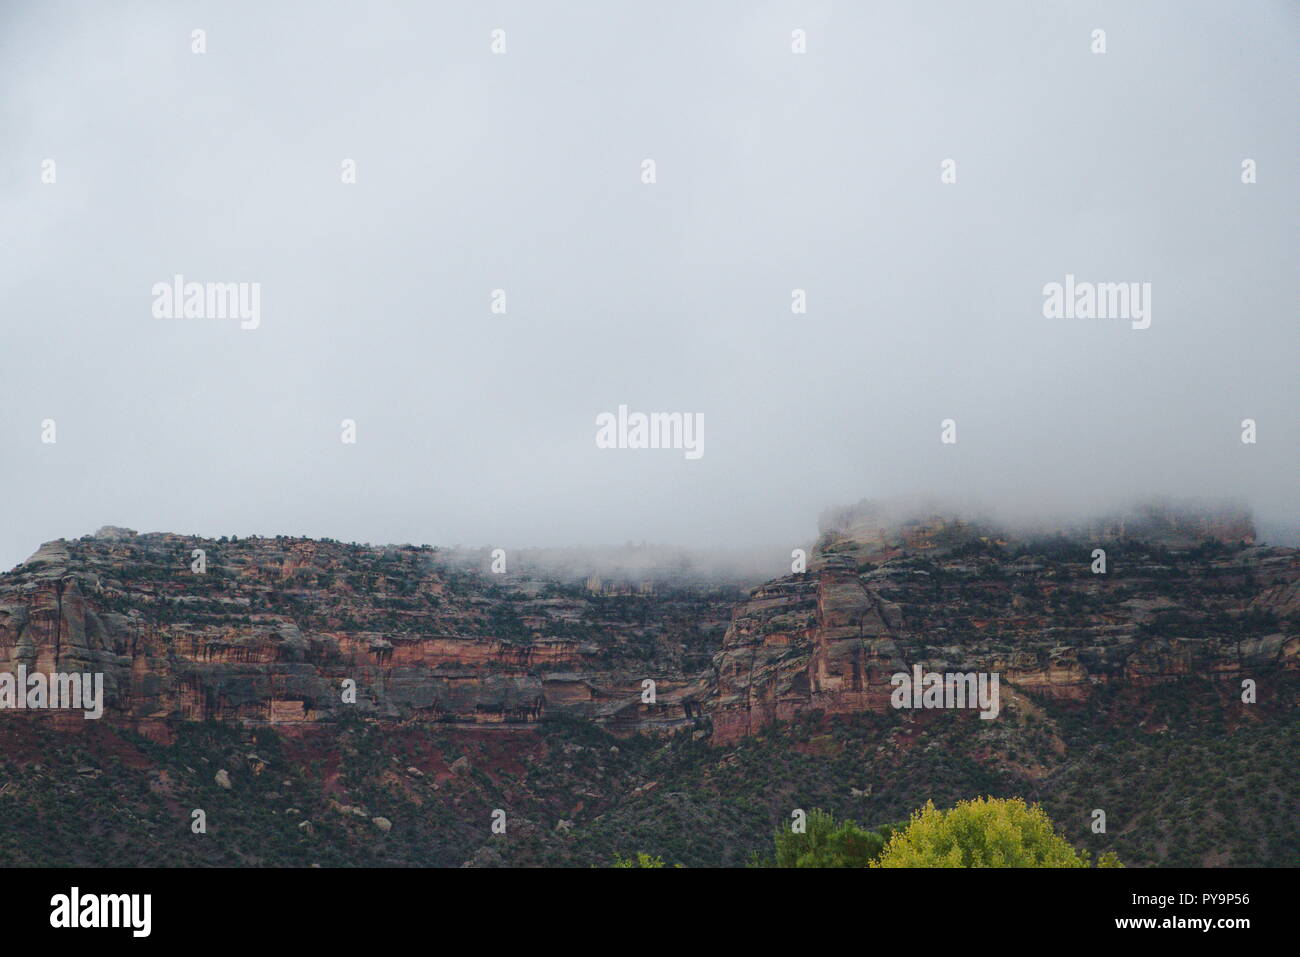 The Colorado National Monument shrouded by a layer of heavy fog. The clouds above are grey and gloomy. There is an overall downcast vibe. Stock Photo